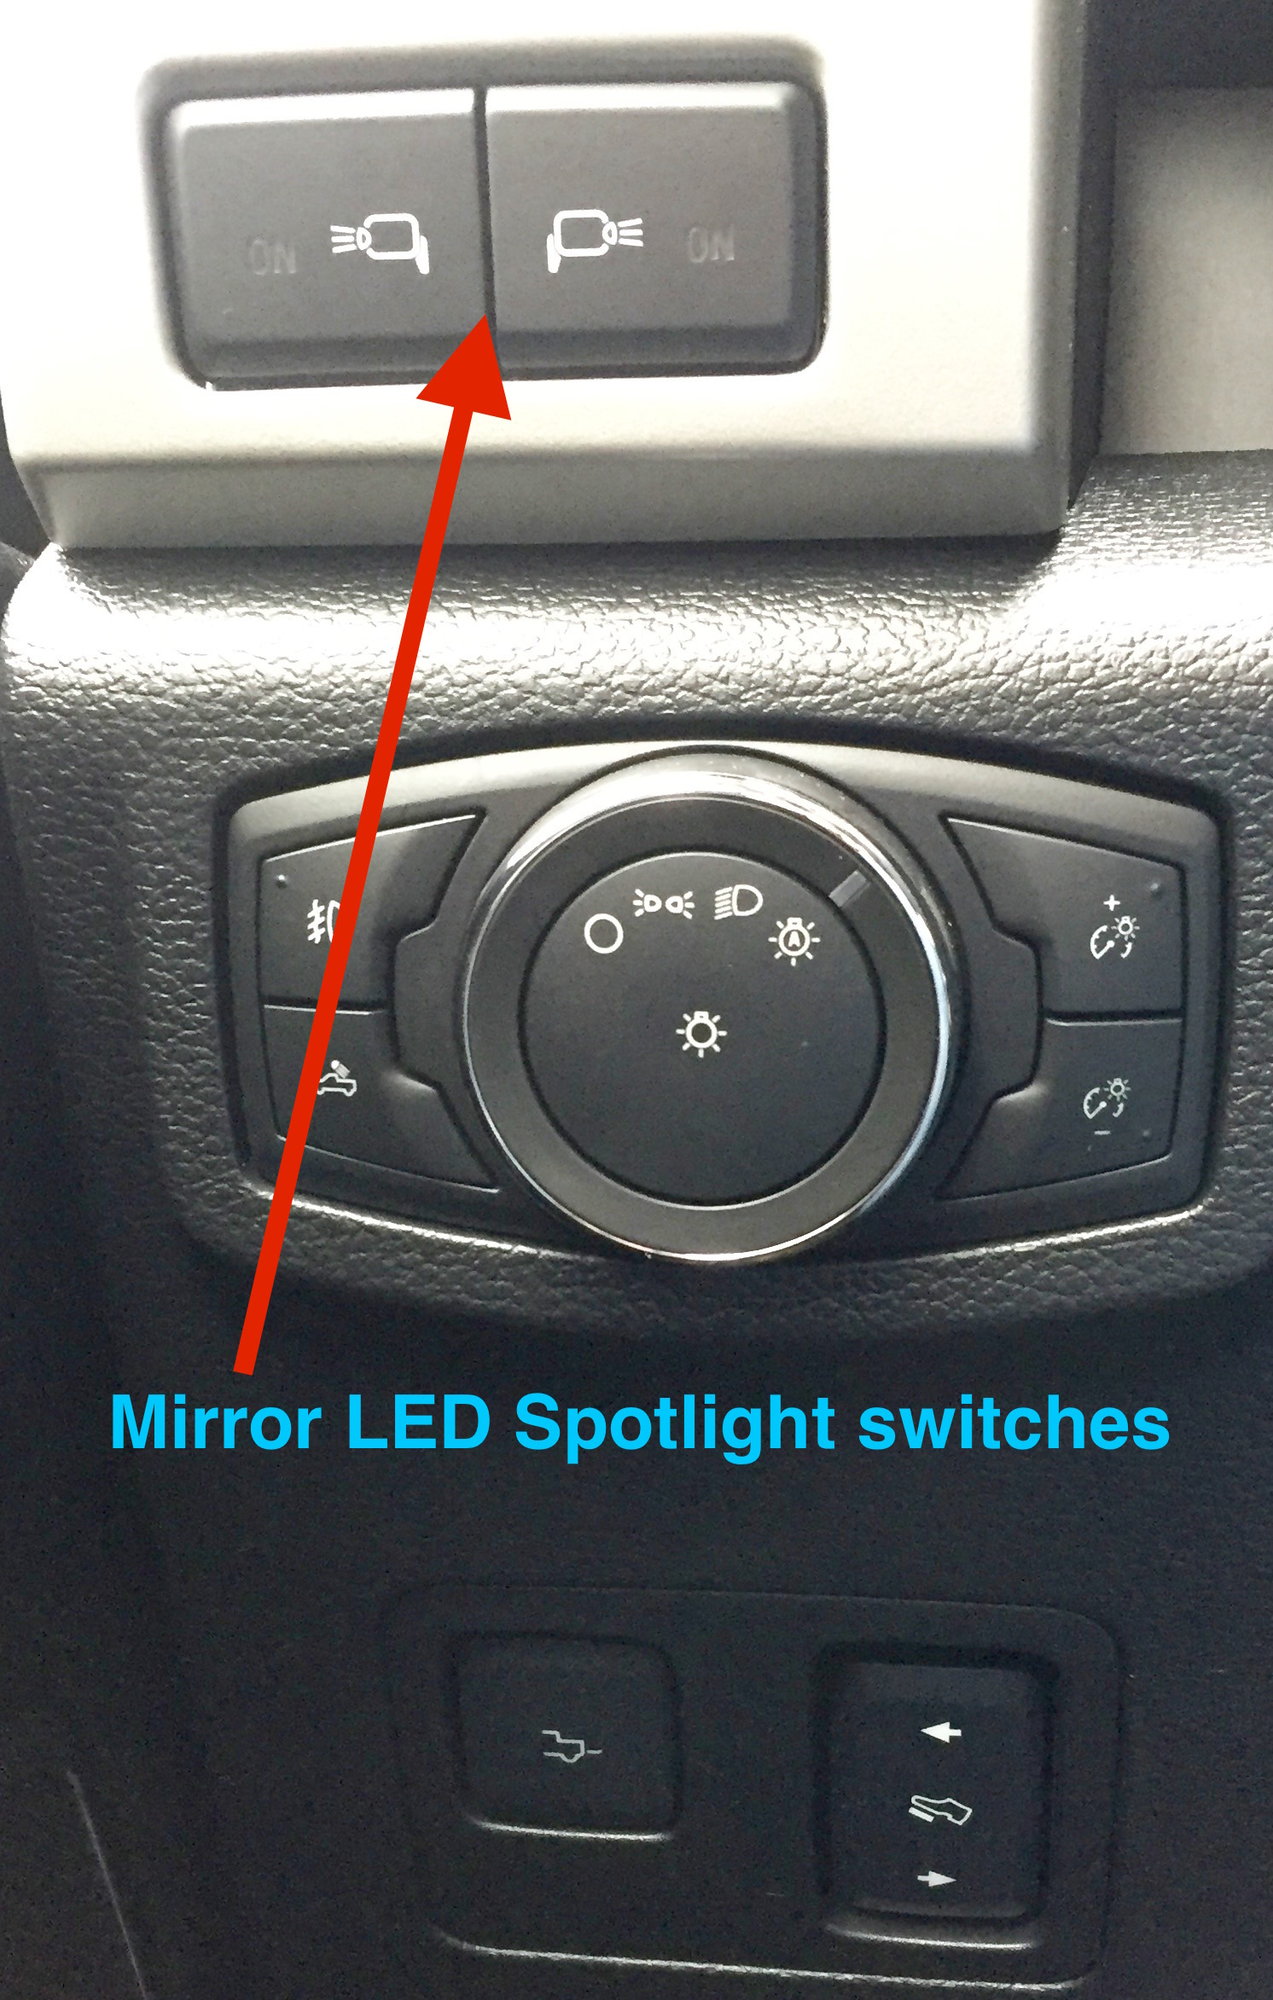 Heated mirrors not working after first use - Ford Truck Enthusiasts Forums